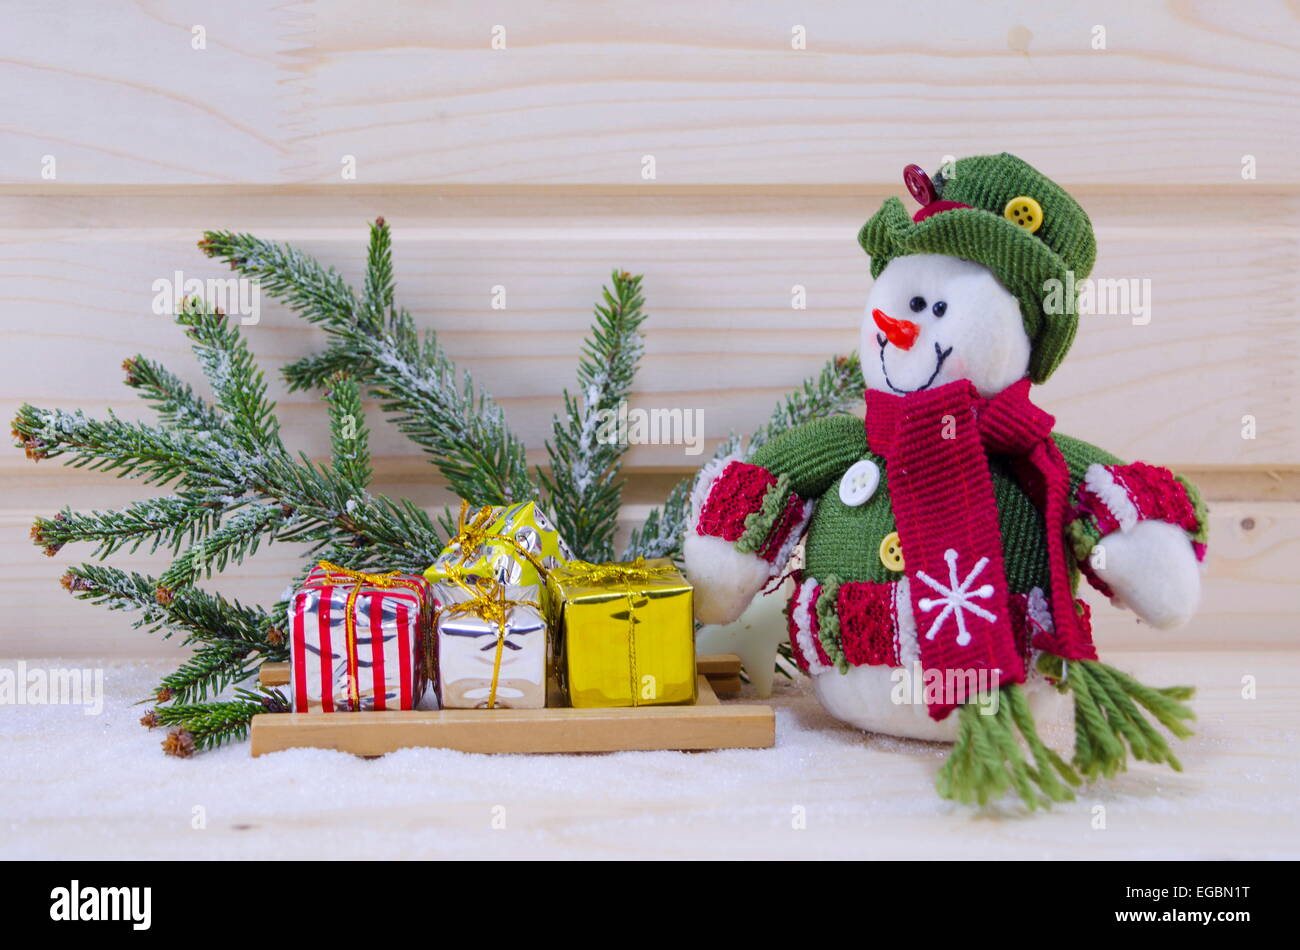 Toy Snowman among fir trees and presents on a snowy wooden surface Stock Photo